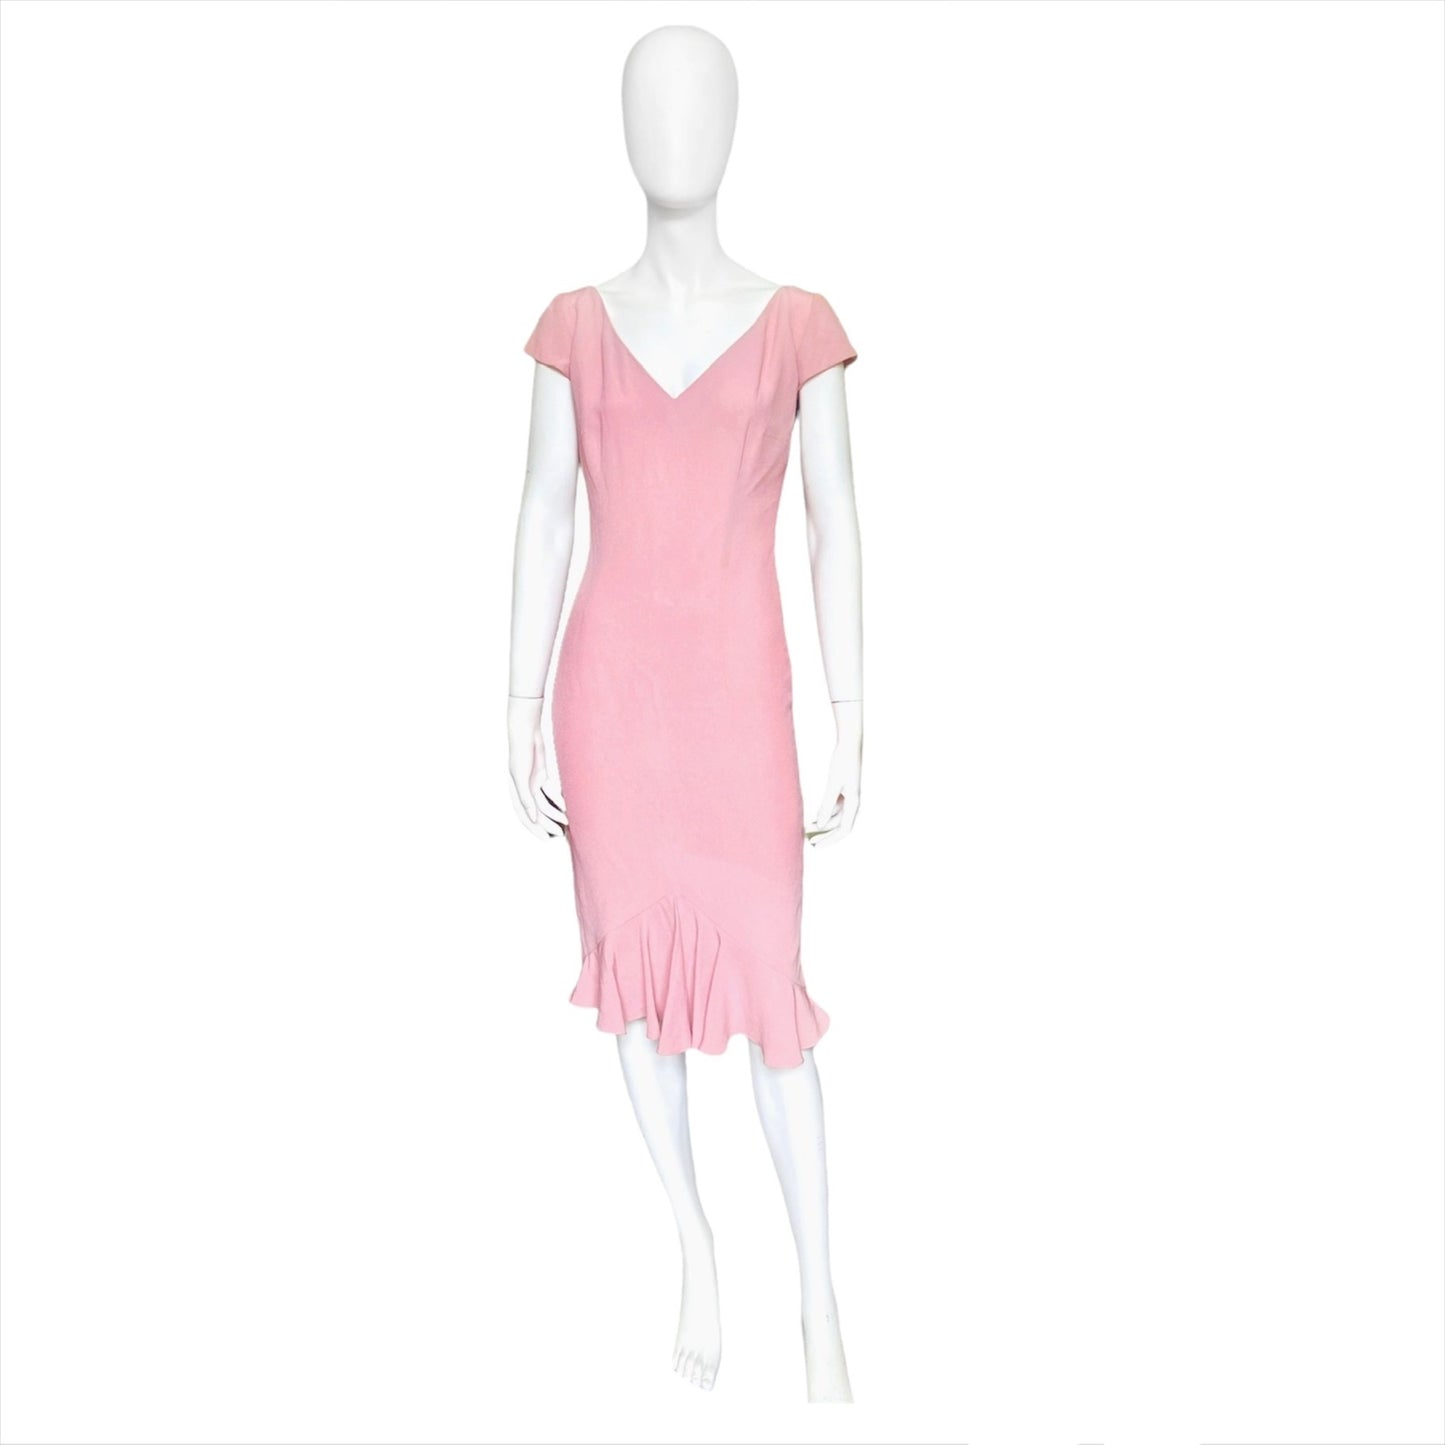 Christian dior Galliano ss99 plunging back pop pink dress